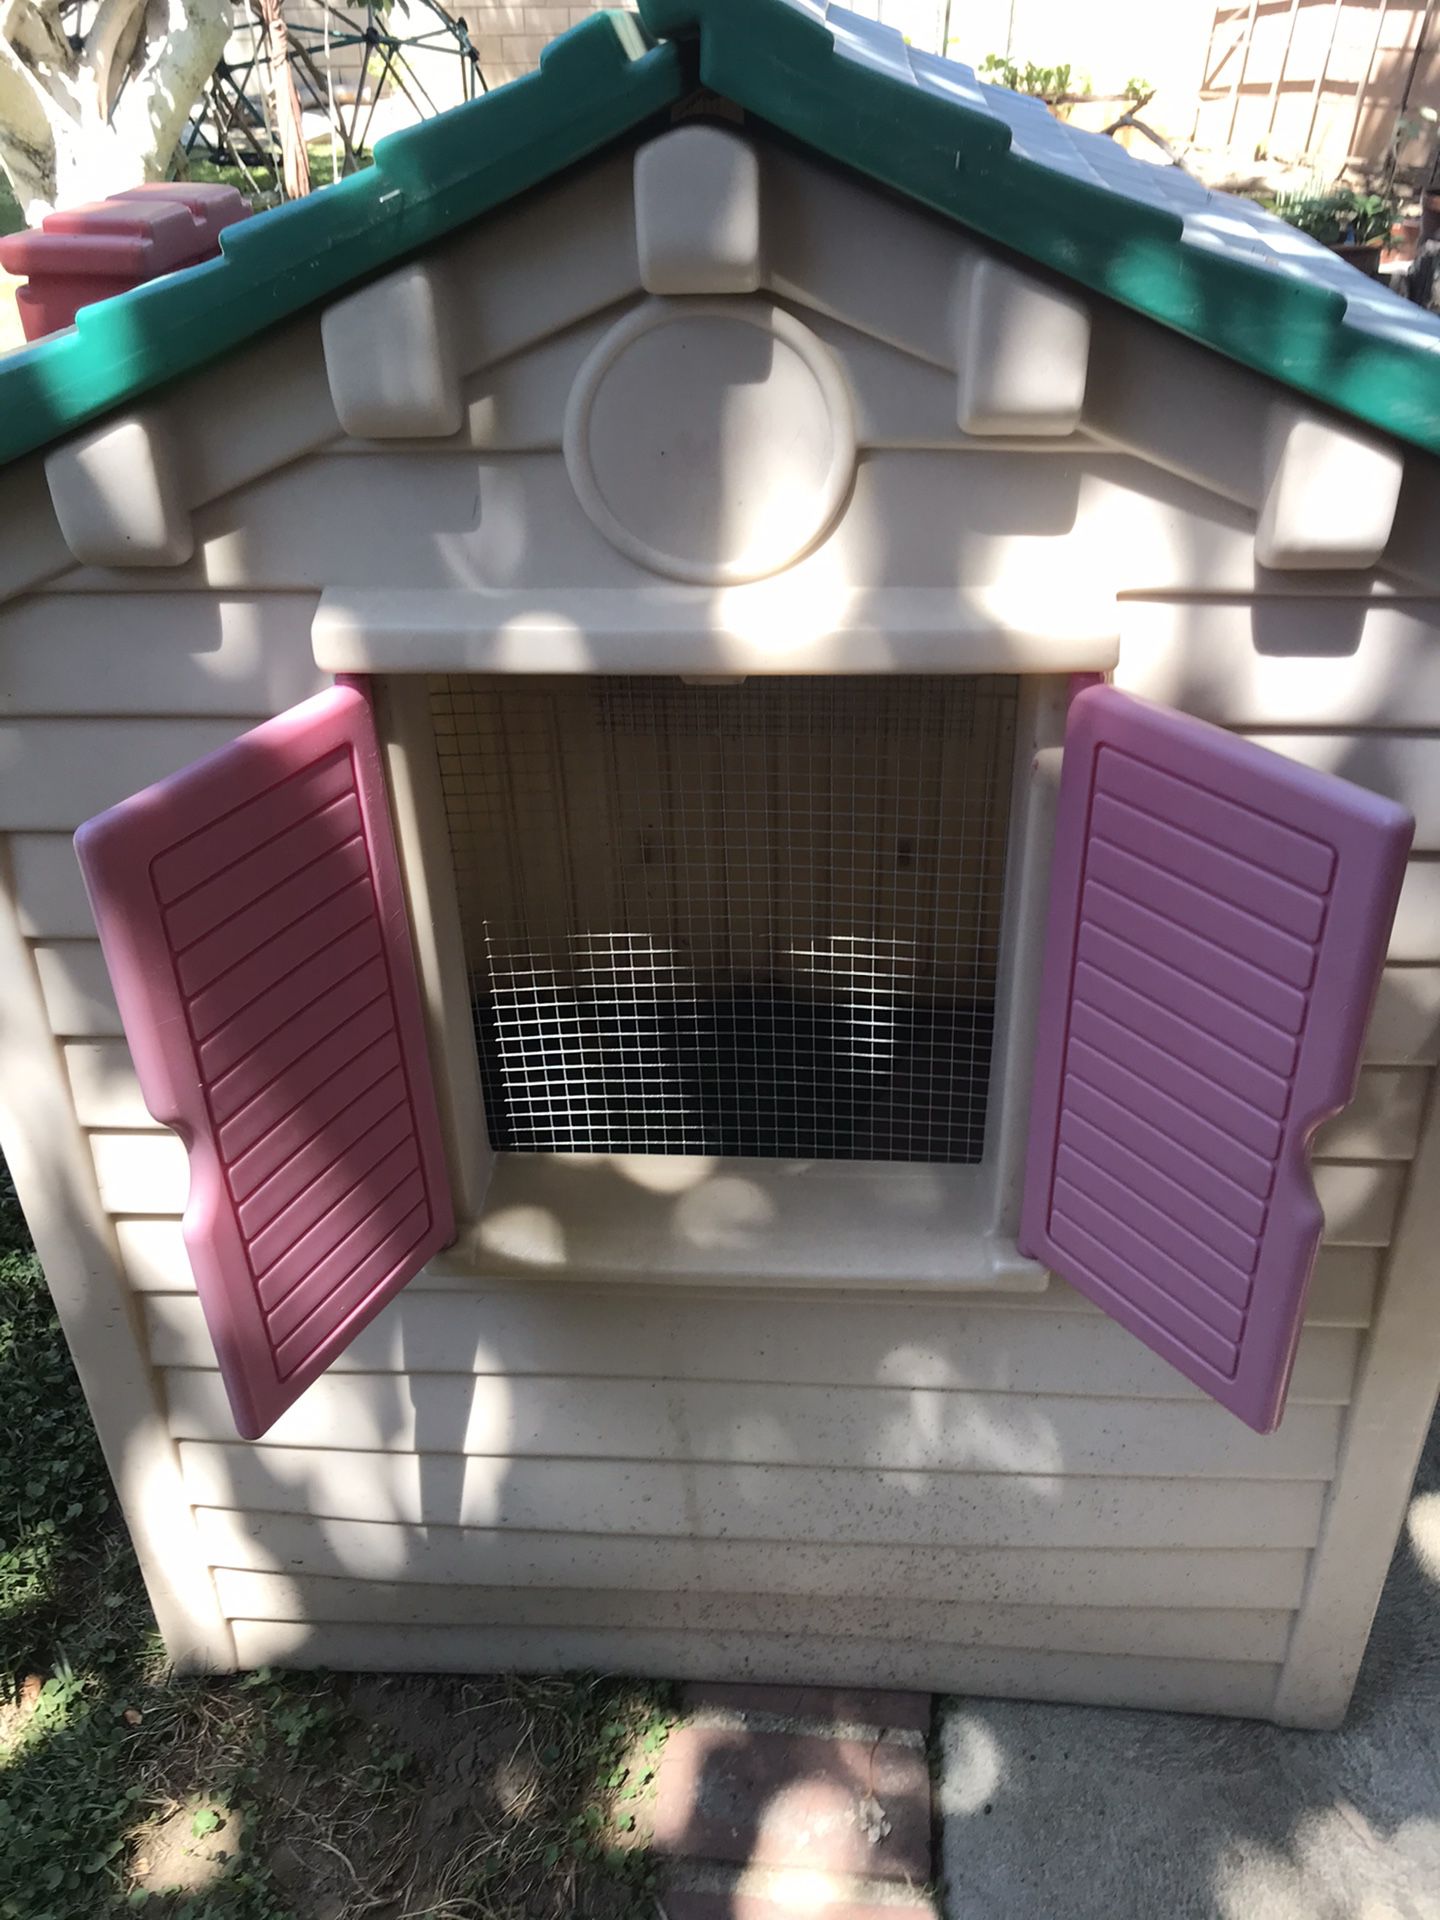 Free playhouse for chicken coop